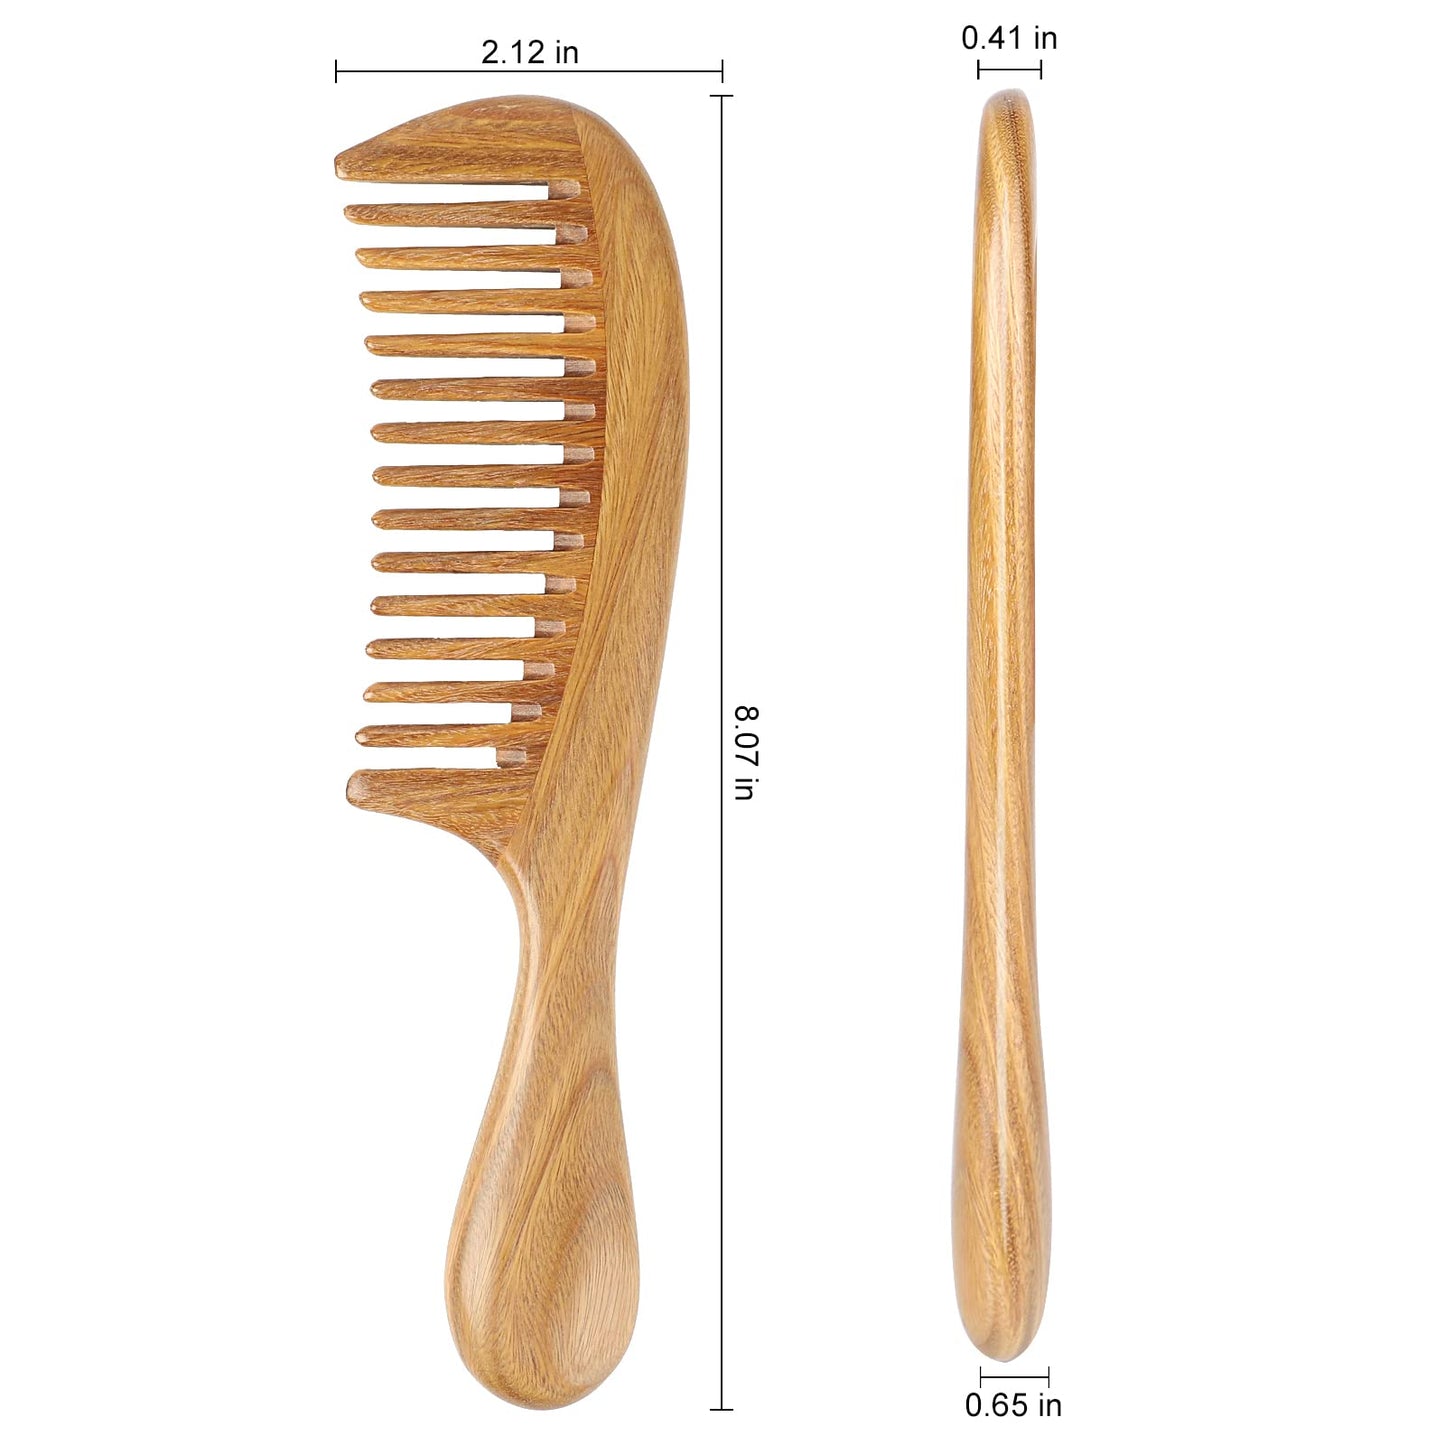 Onedor Handmade 100% Natural Green Sandalwood Hair Combs - Anti-Static Sandalwood Scent Natural Hair Detangler Wooden Comb (Wide Tooth),1 Count (Pack of 1)